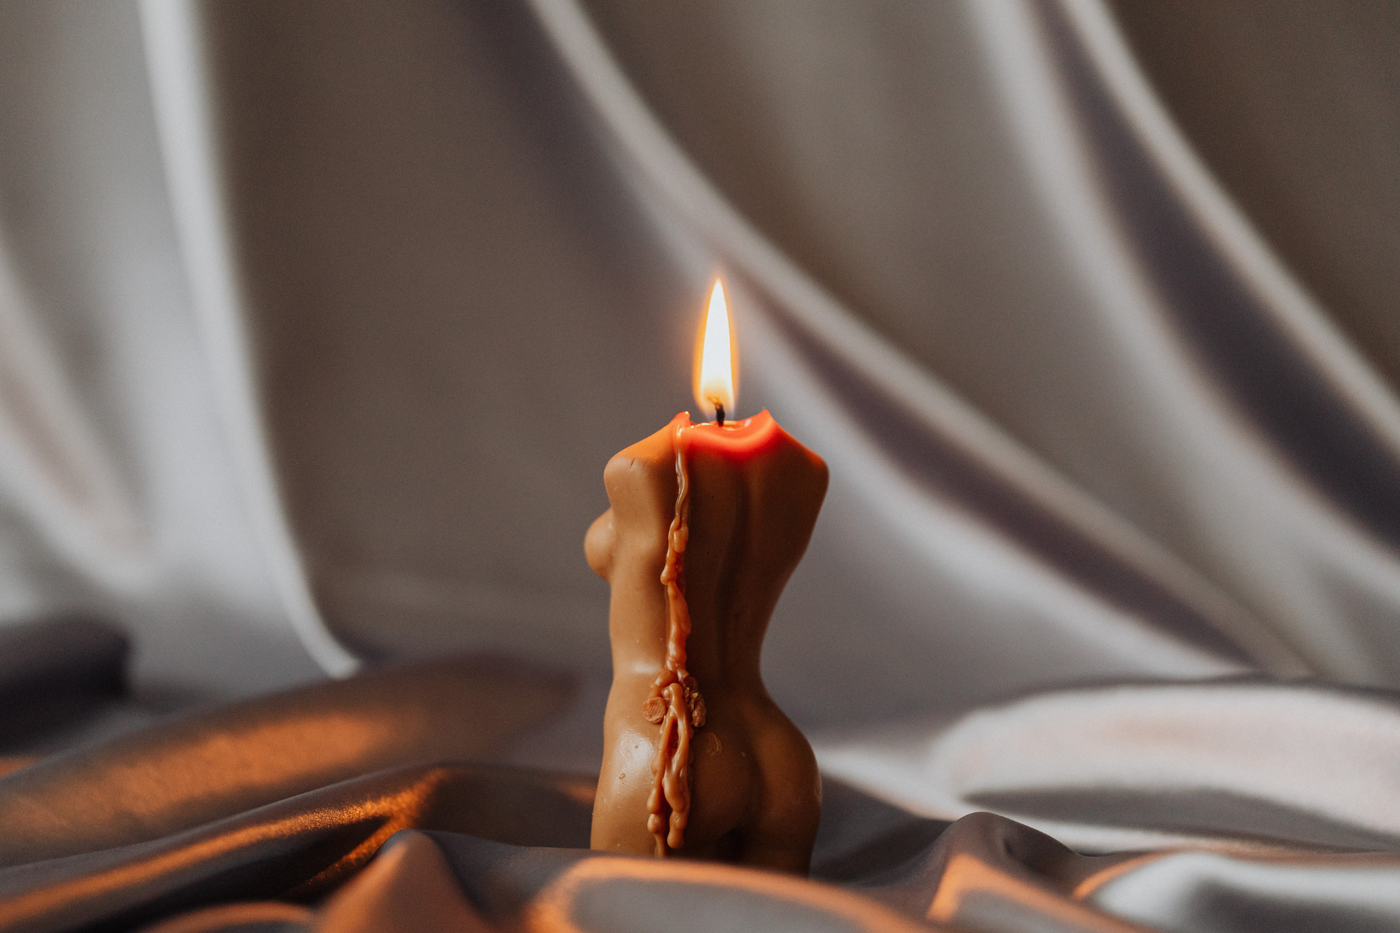 5 Things to Know Before Trying Wax Play